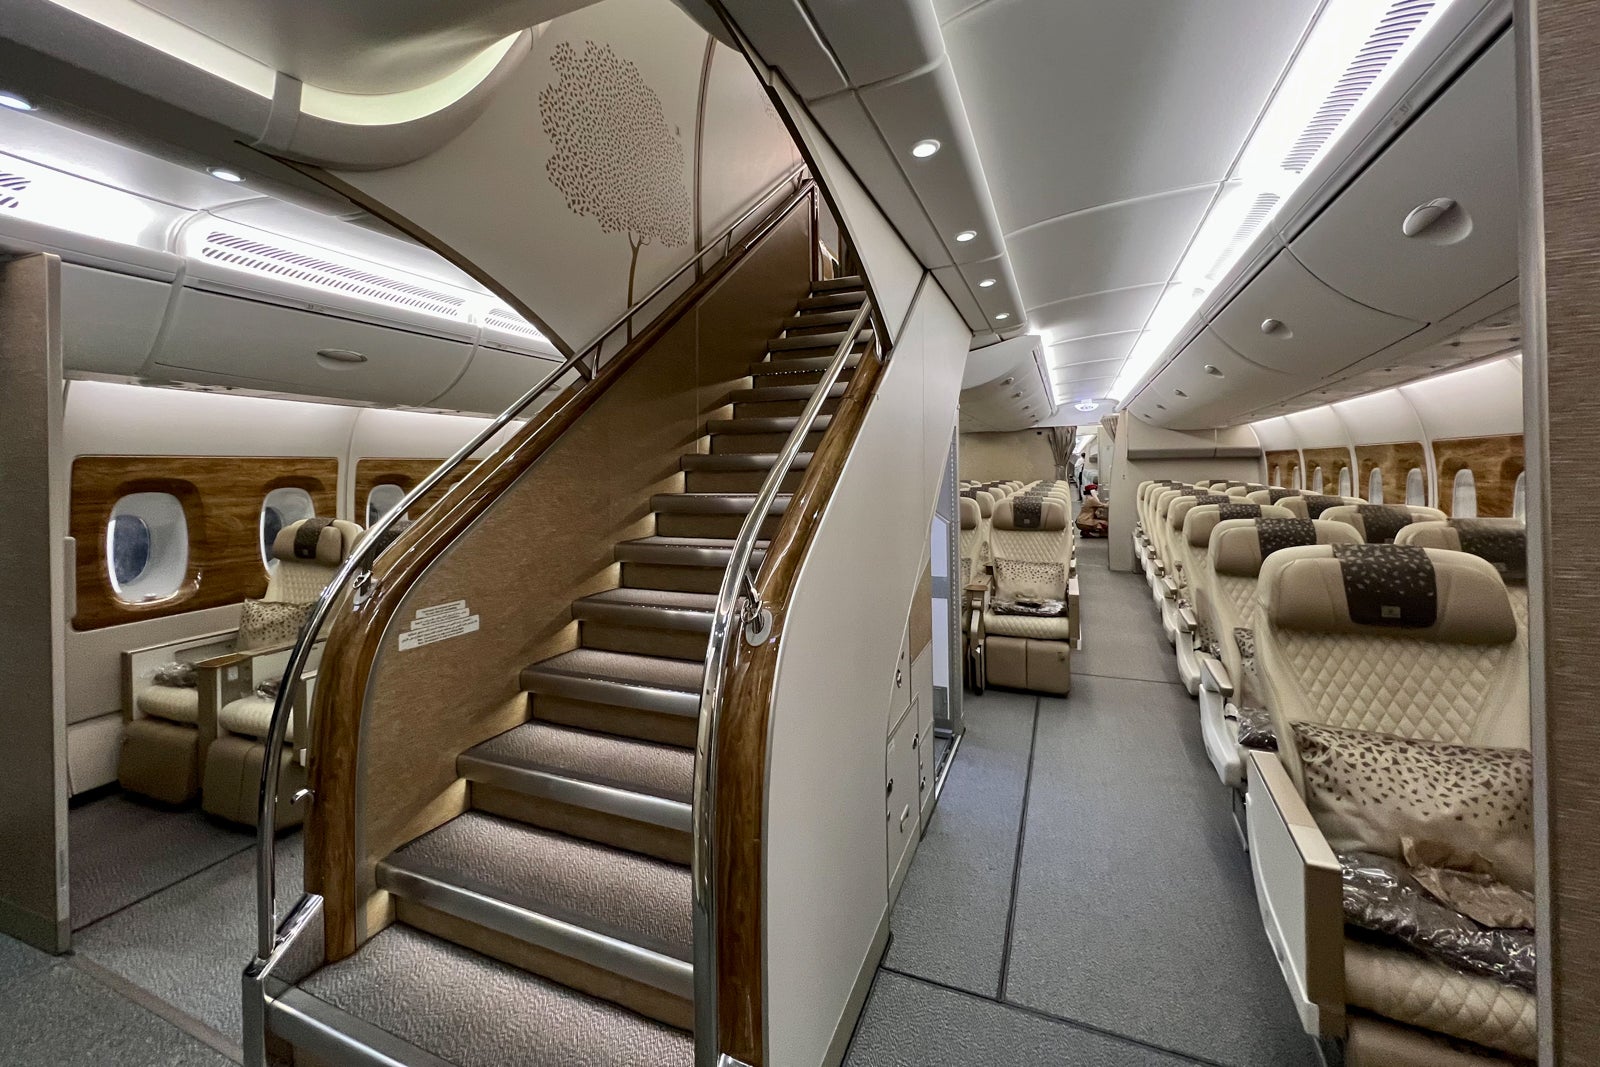 assign Pants Rose Review: Emirates' new premium economy cabin on the Airbus A380